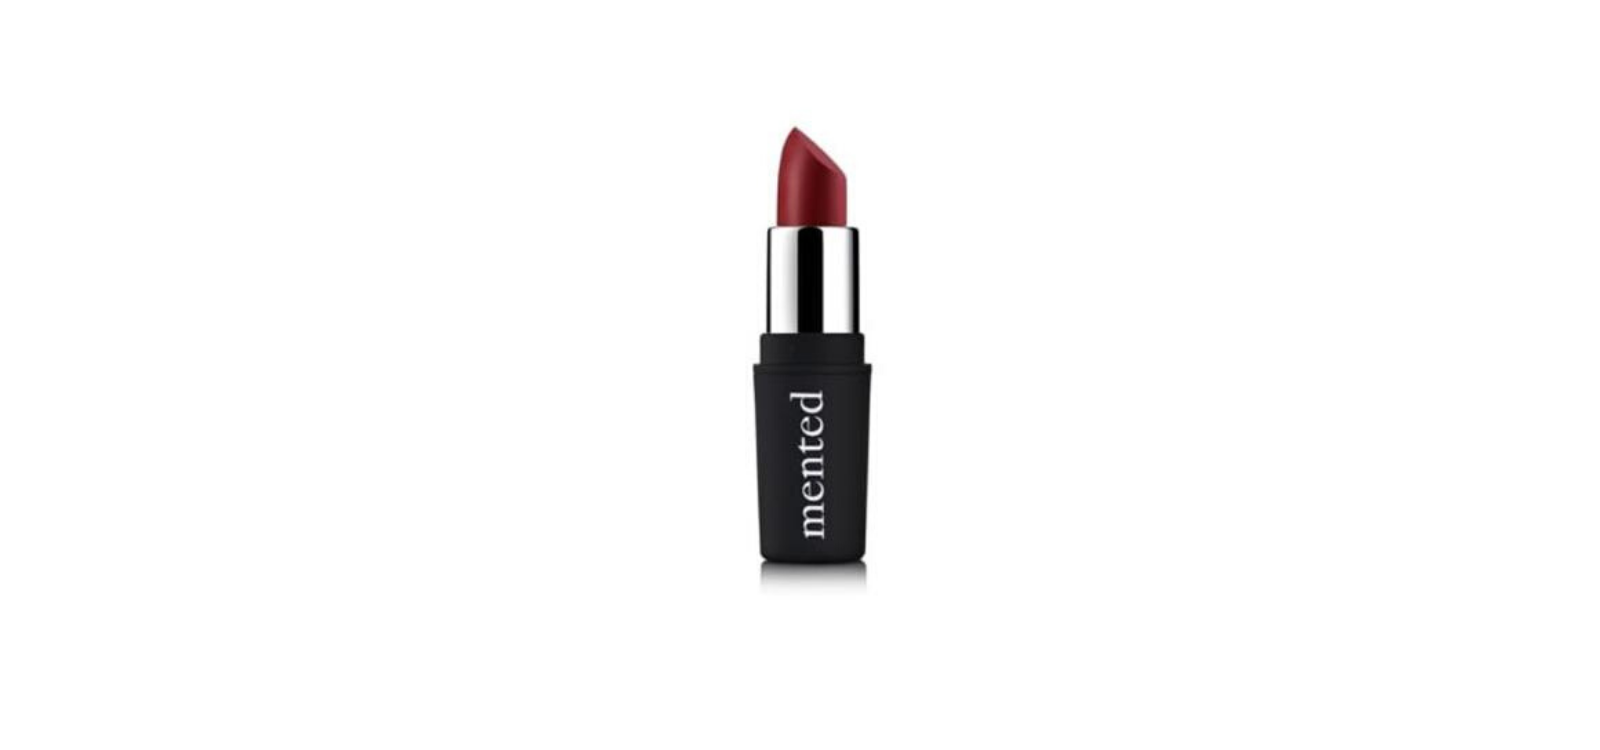 15 Red Lipsticks To Last You All Valentine's Day Long